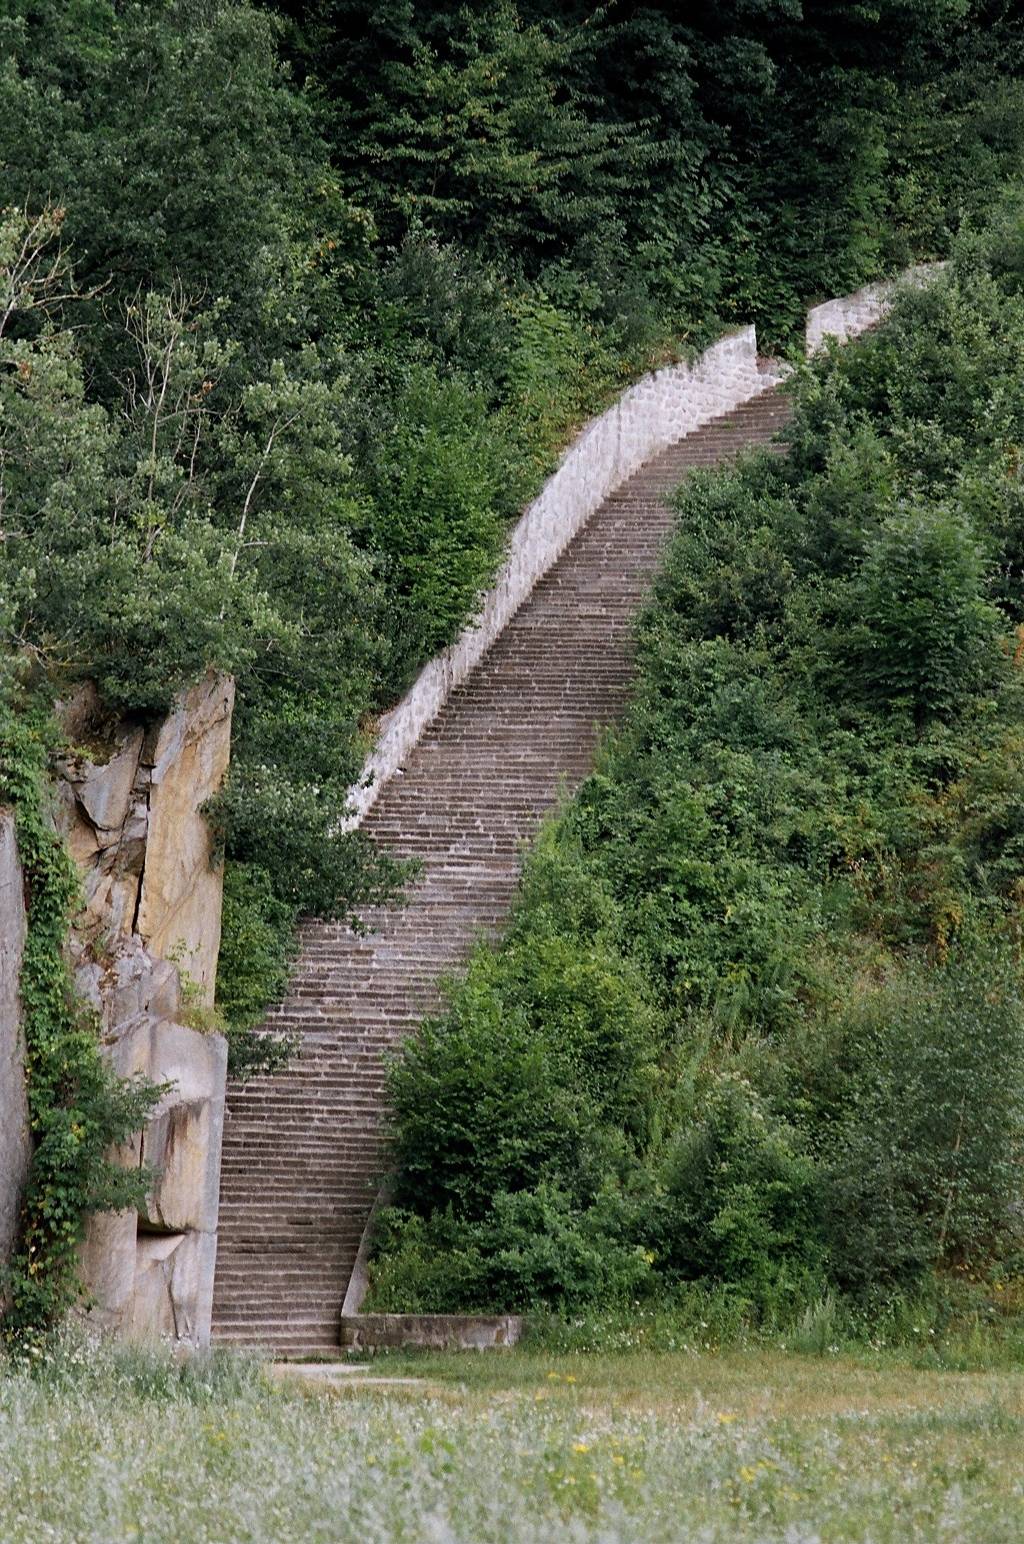 Stairway (“Stairway of Death”) at the Mauthausen Memorial not accessible